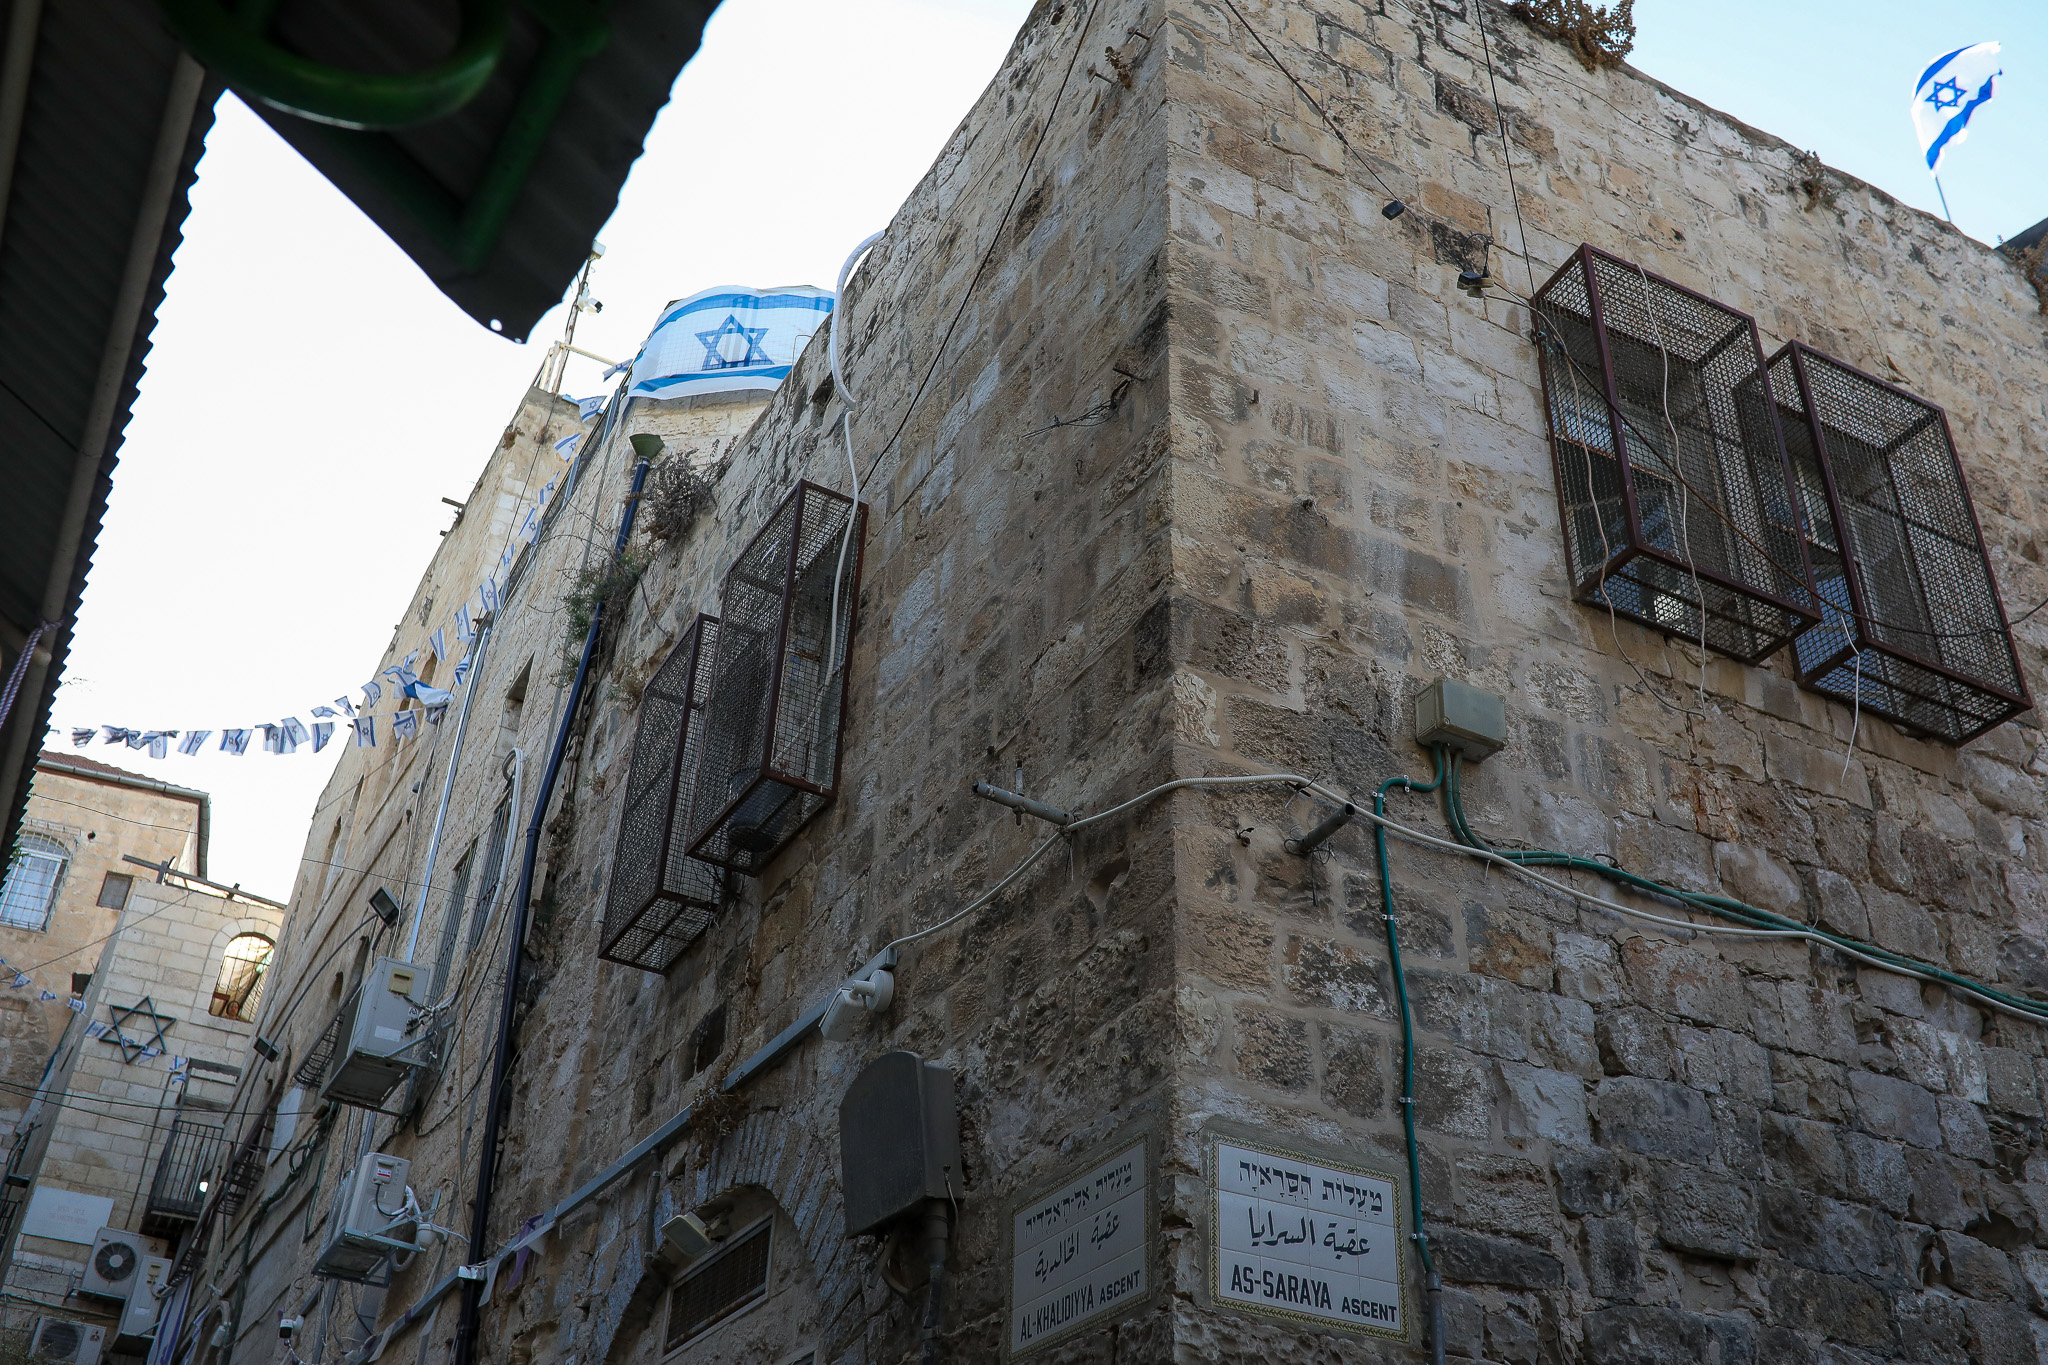 An Israeli flag hangs outside the home of the Ghaith Sub-Laban family in the Old City of Jerusalem, after Jewish settlers took over the property, July 11, 2023. (Yahel Gazit)